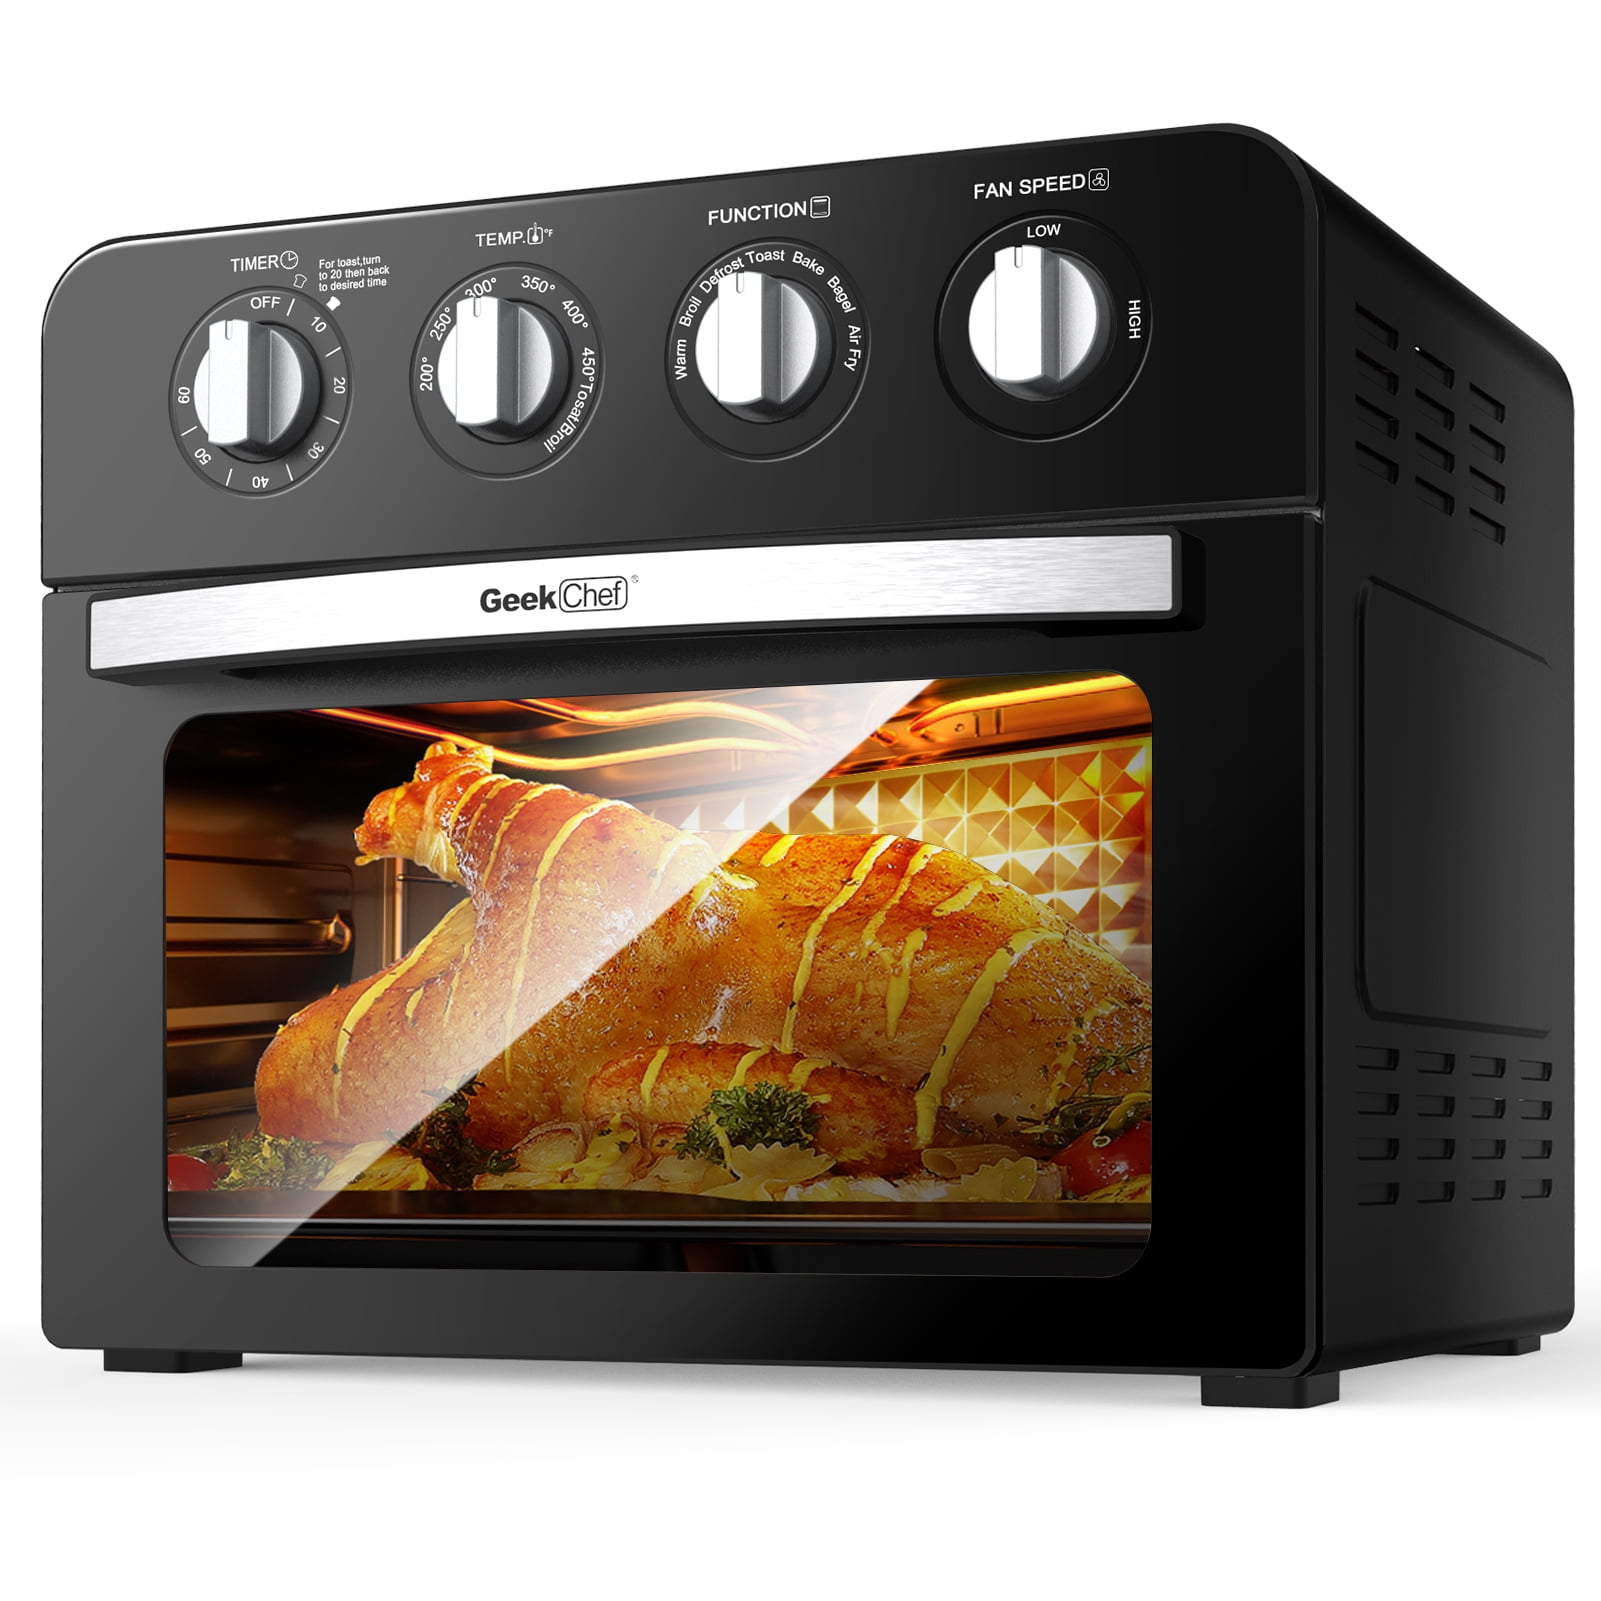 Dash Chef Series 7 in 1 Convection Toaster Oven Cooker 23L Stainless Steel